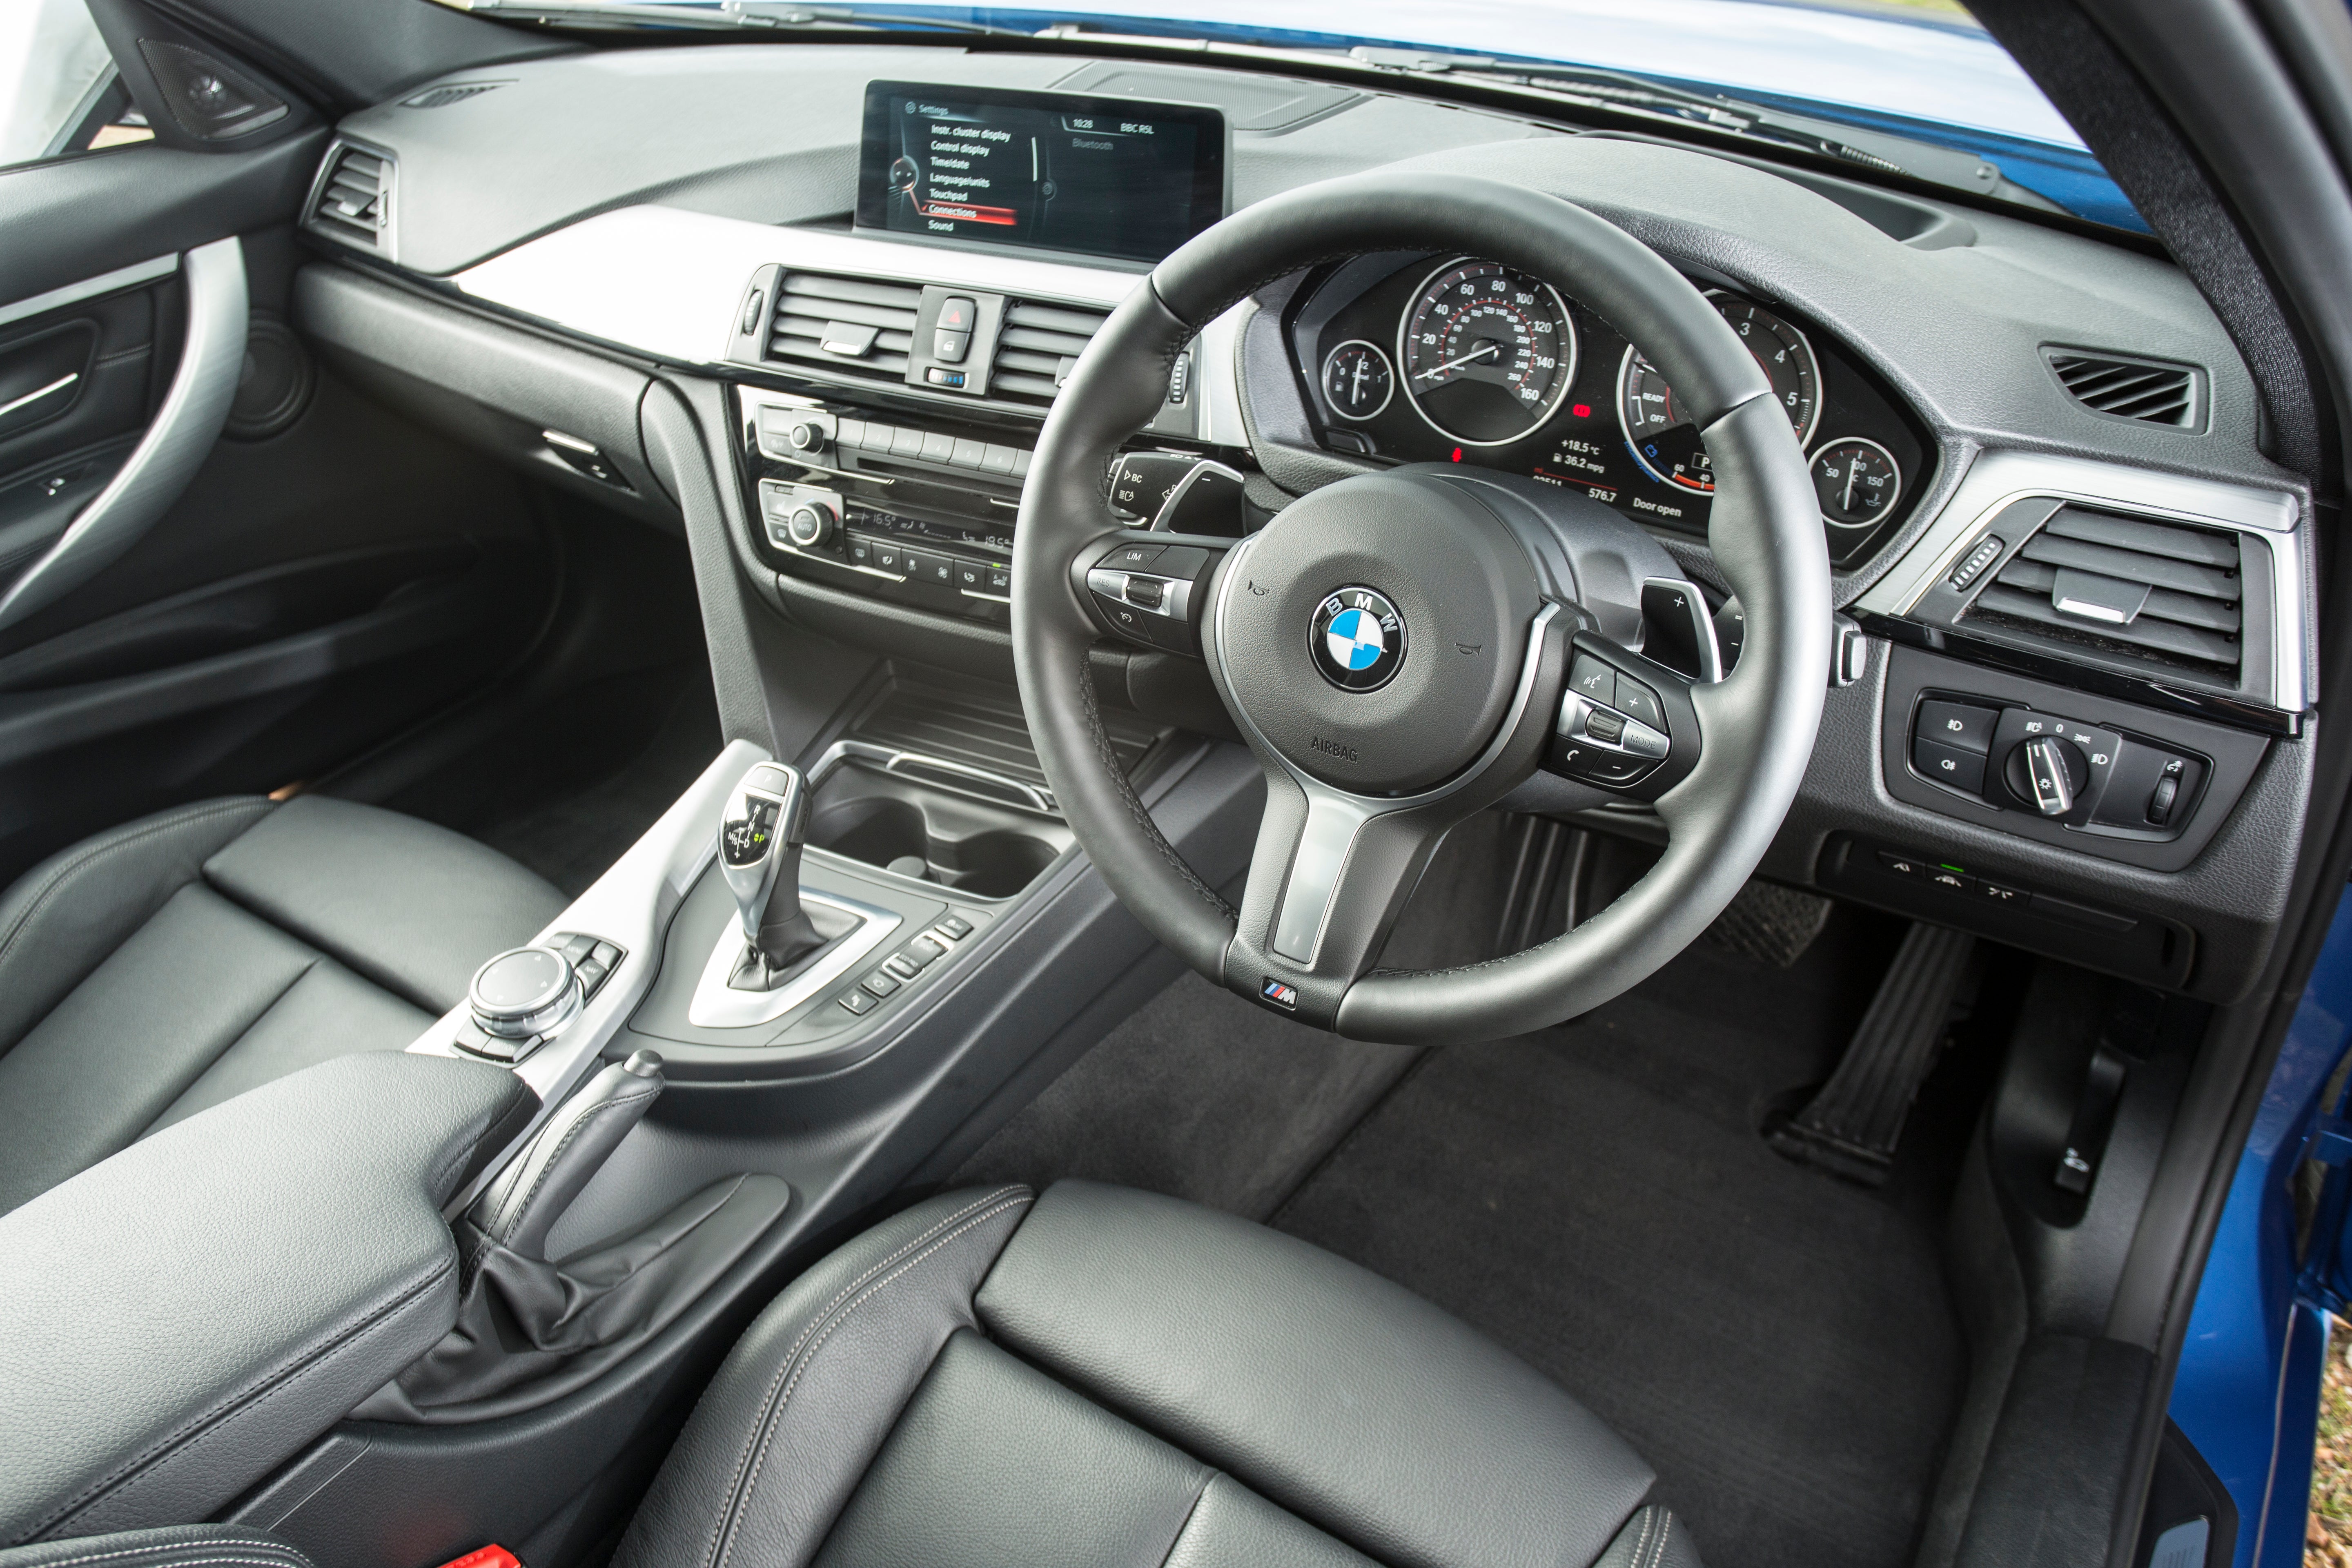 BMW F31 3-Series Touring Review (2013-19)